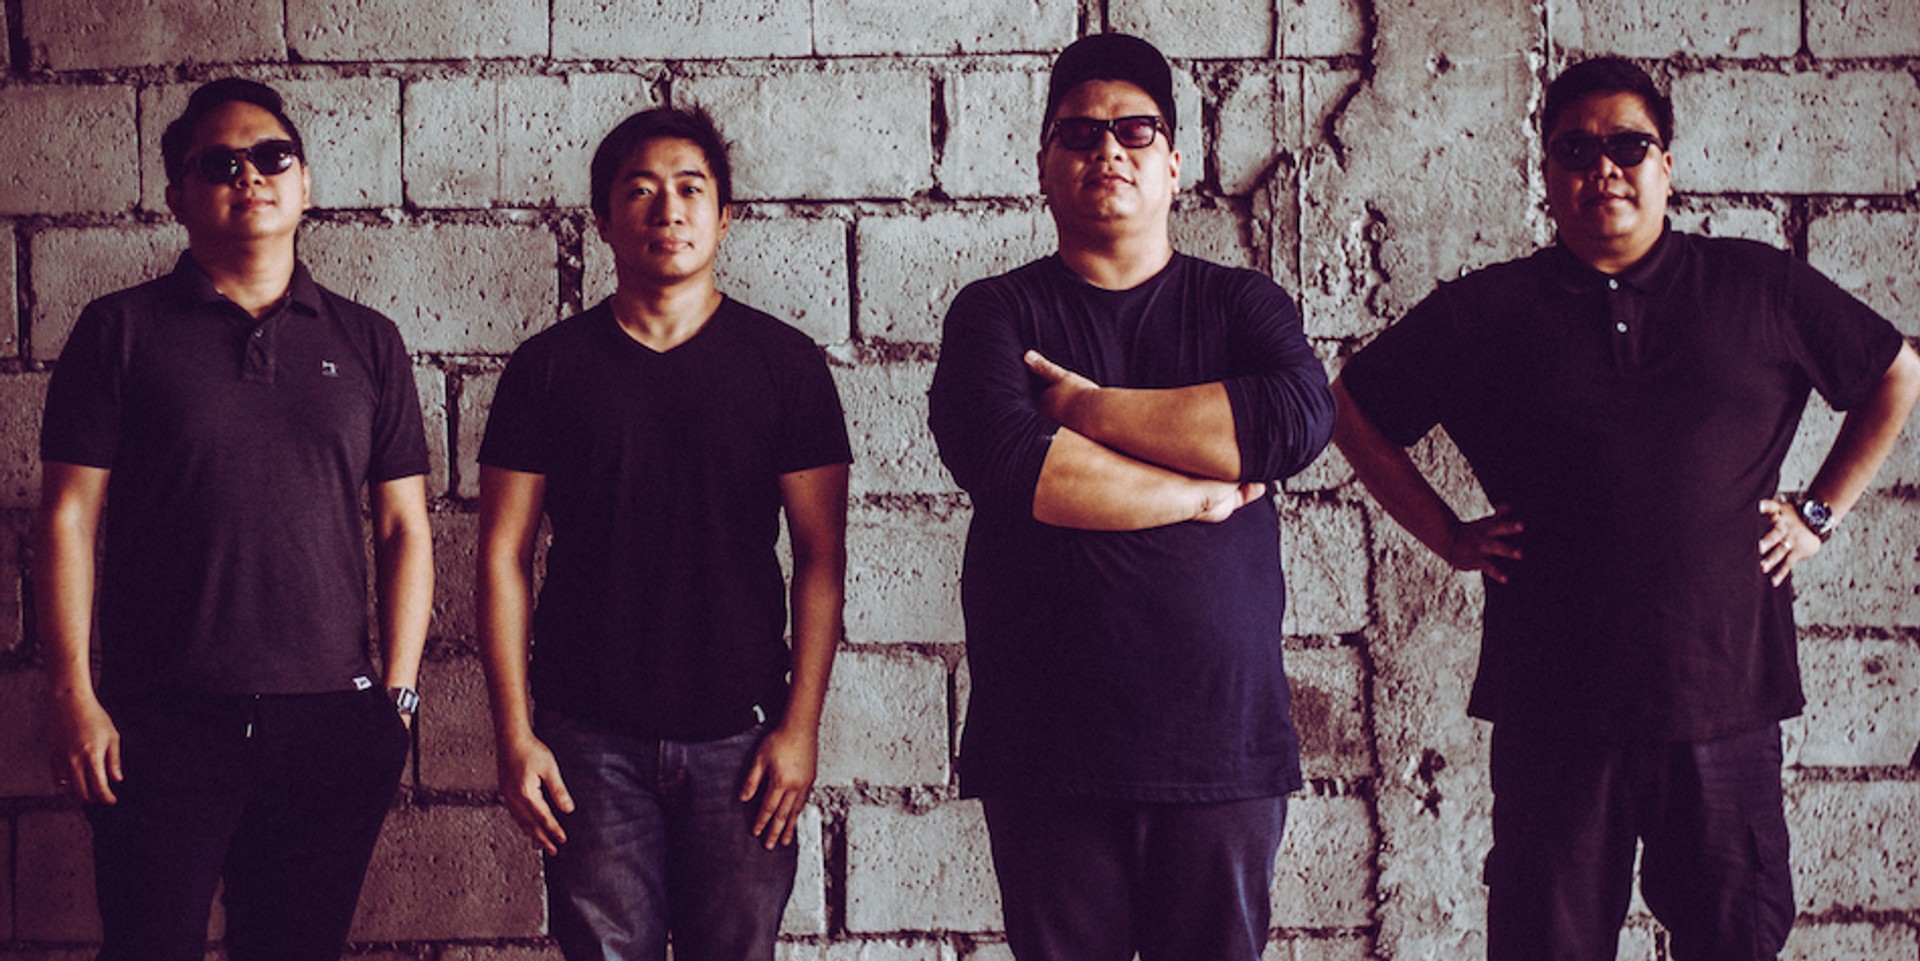 Itchyworms call on fans to design their new logo